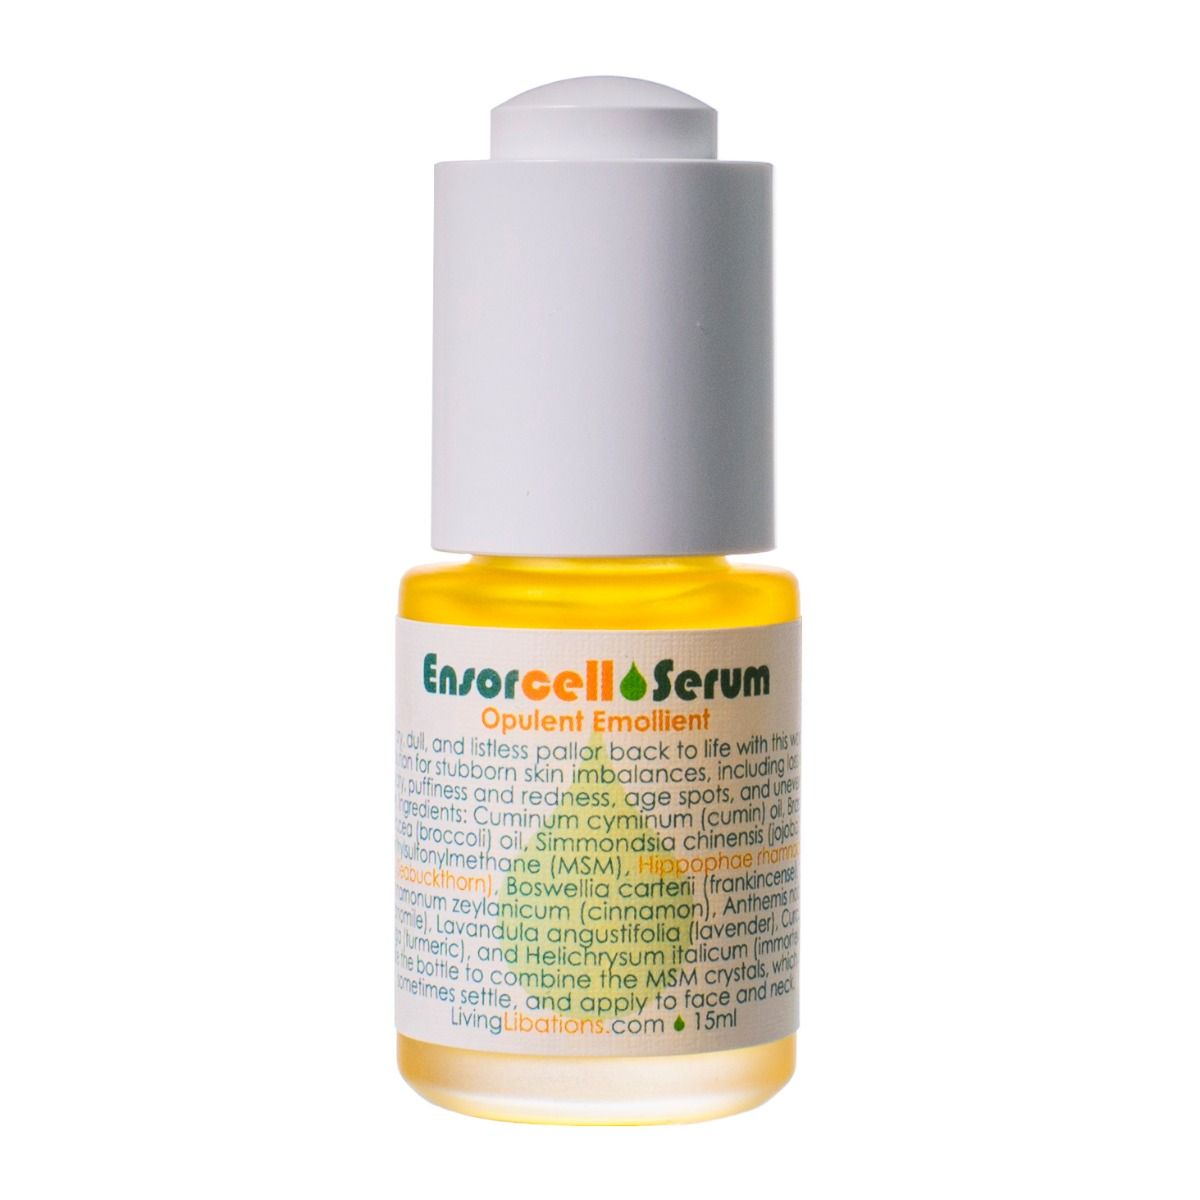 Ensorcell Serum by Living Libations